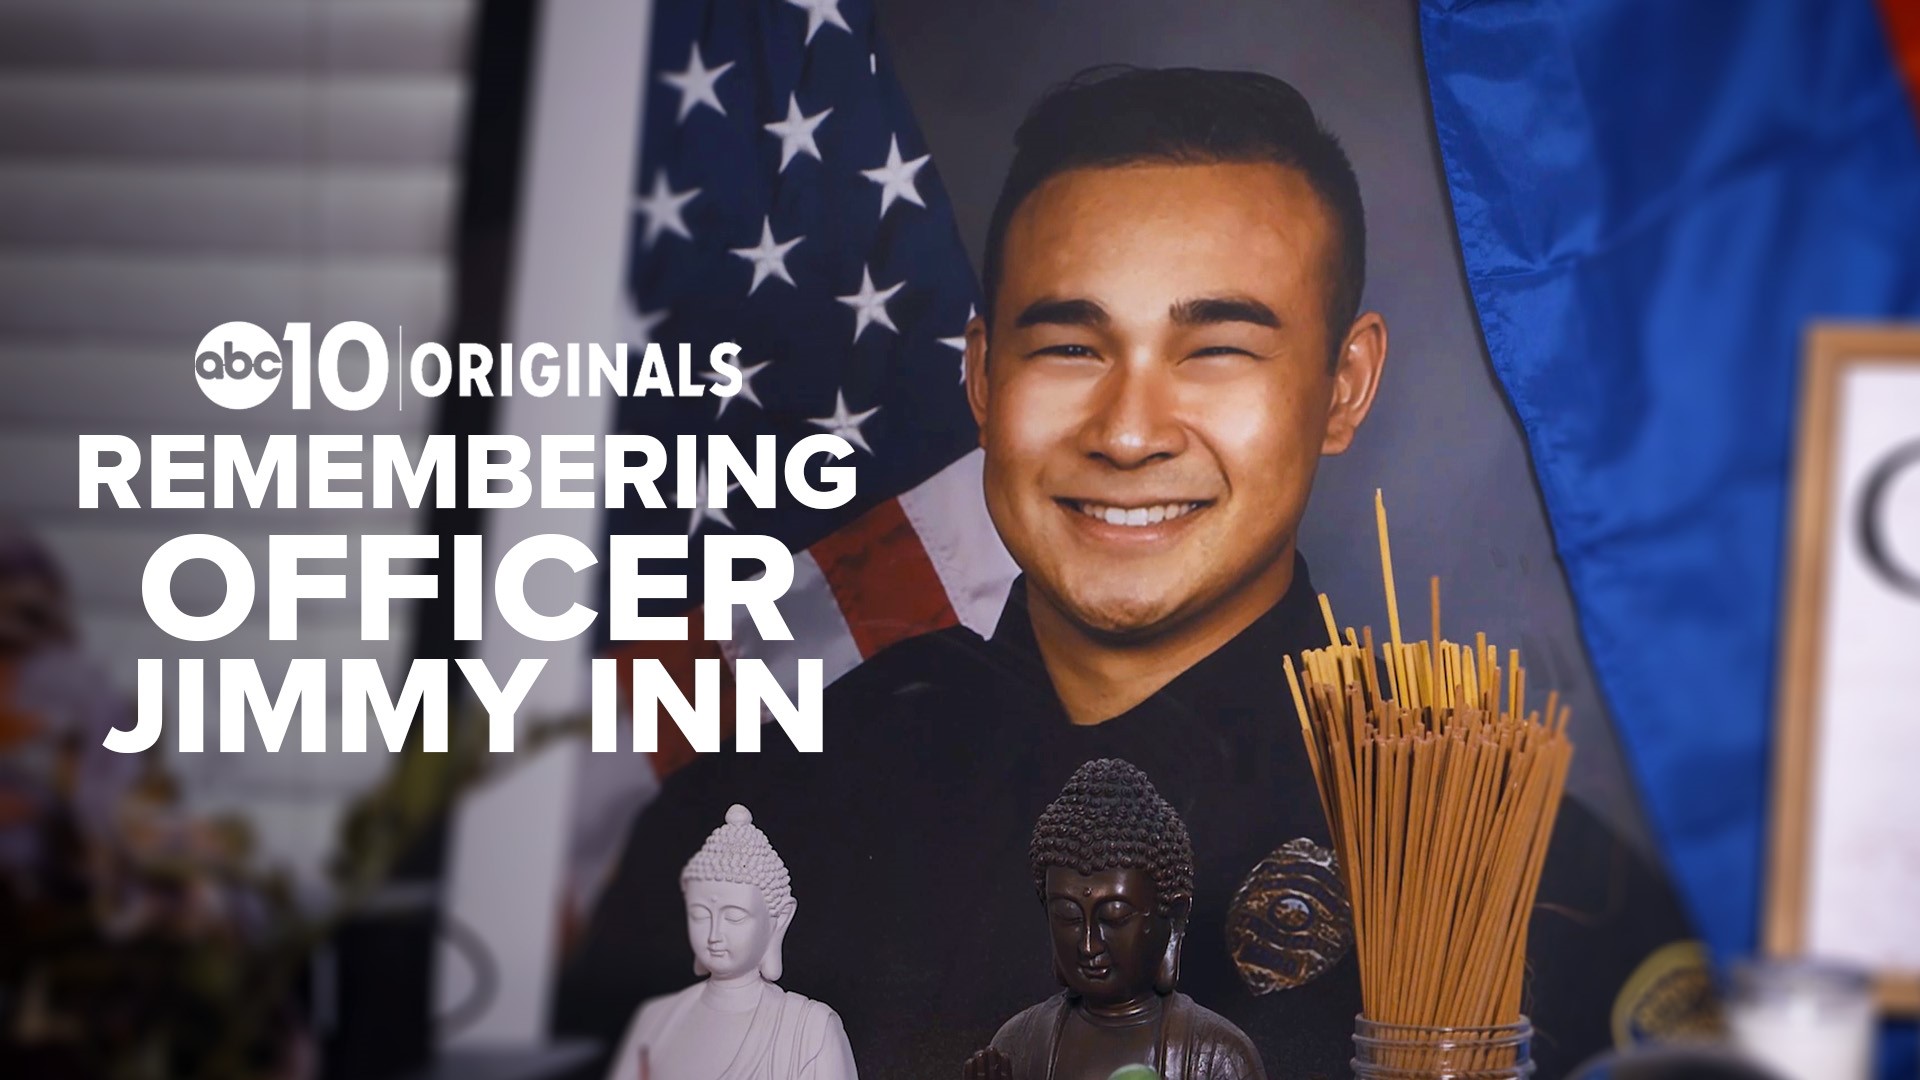 On May 11, 2021, Stockton police officer Jimmy Inn was shot and killed while responding to a domestic violence dispute.